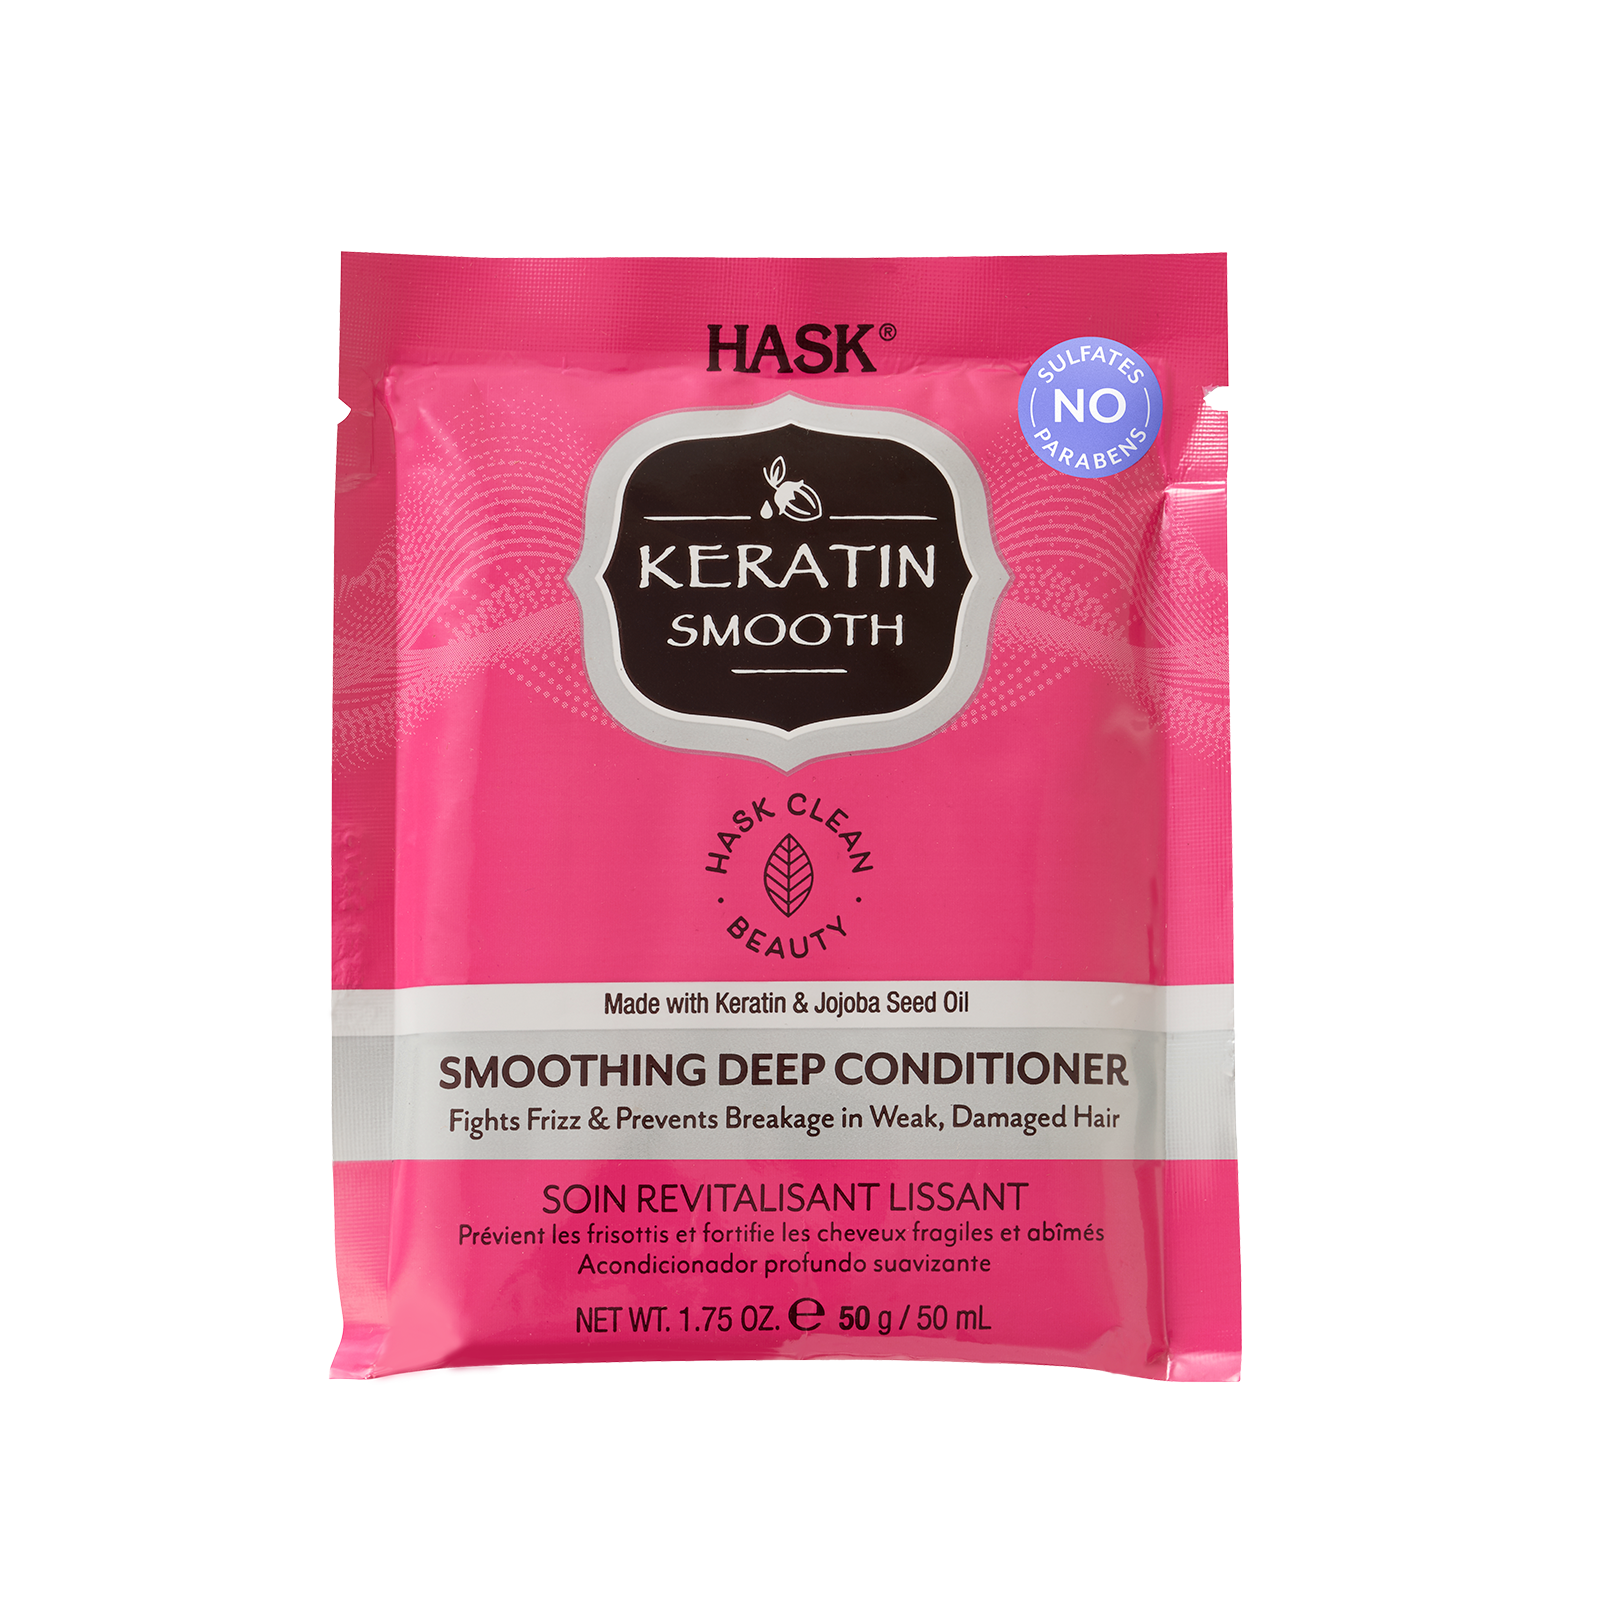 Keratin Smoothing Deep Conditioner - HASK